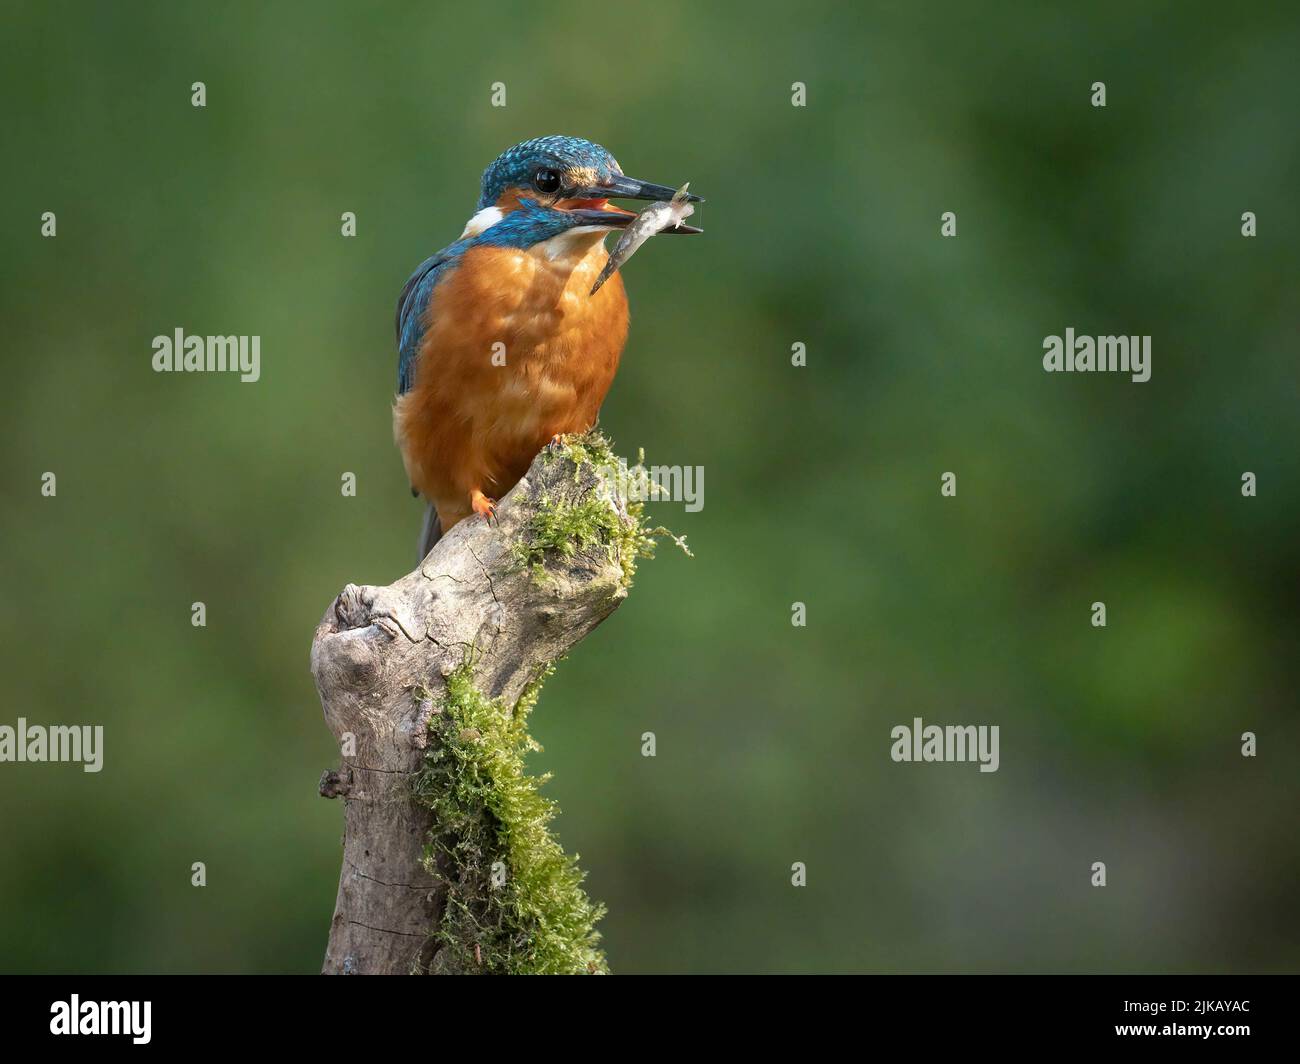 A successful catch for this kingfisher. Dorset, UK: THIS CHEEKY kingfisher was spotted defying the rules, perching with his latest catch on a ?no fish Stock Photo